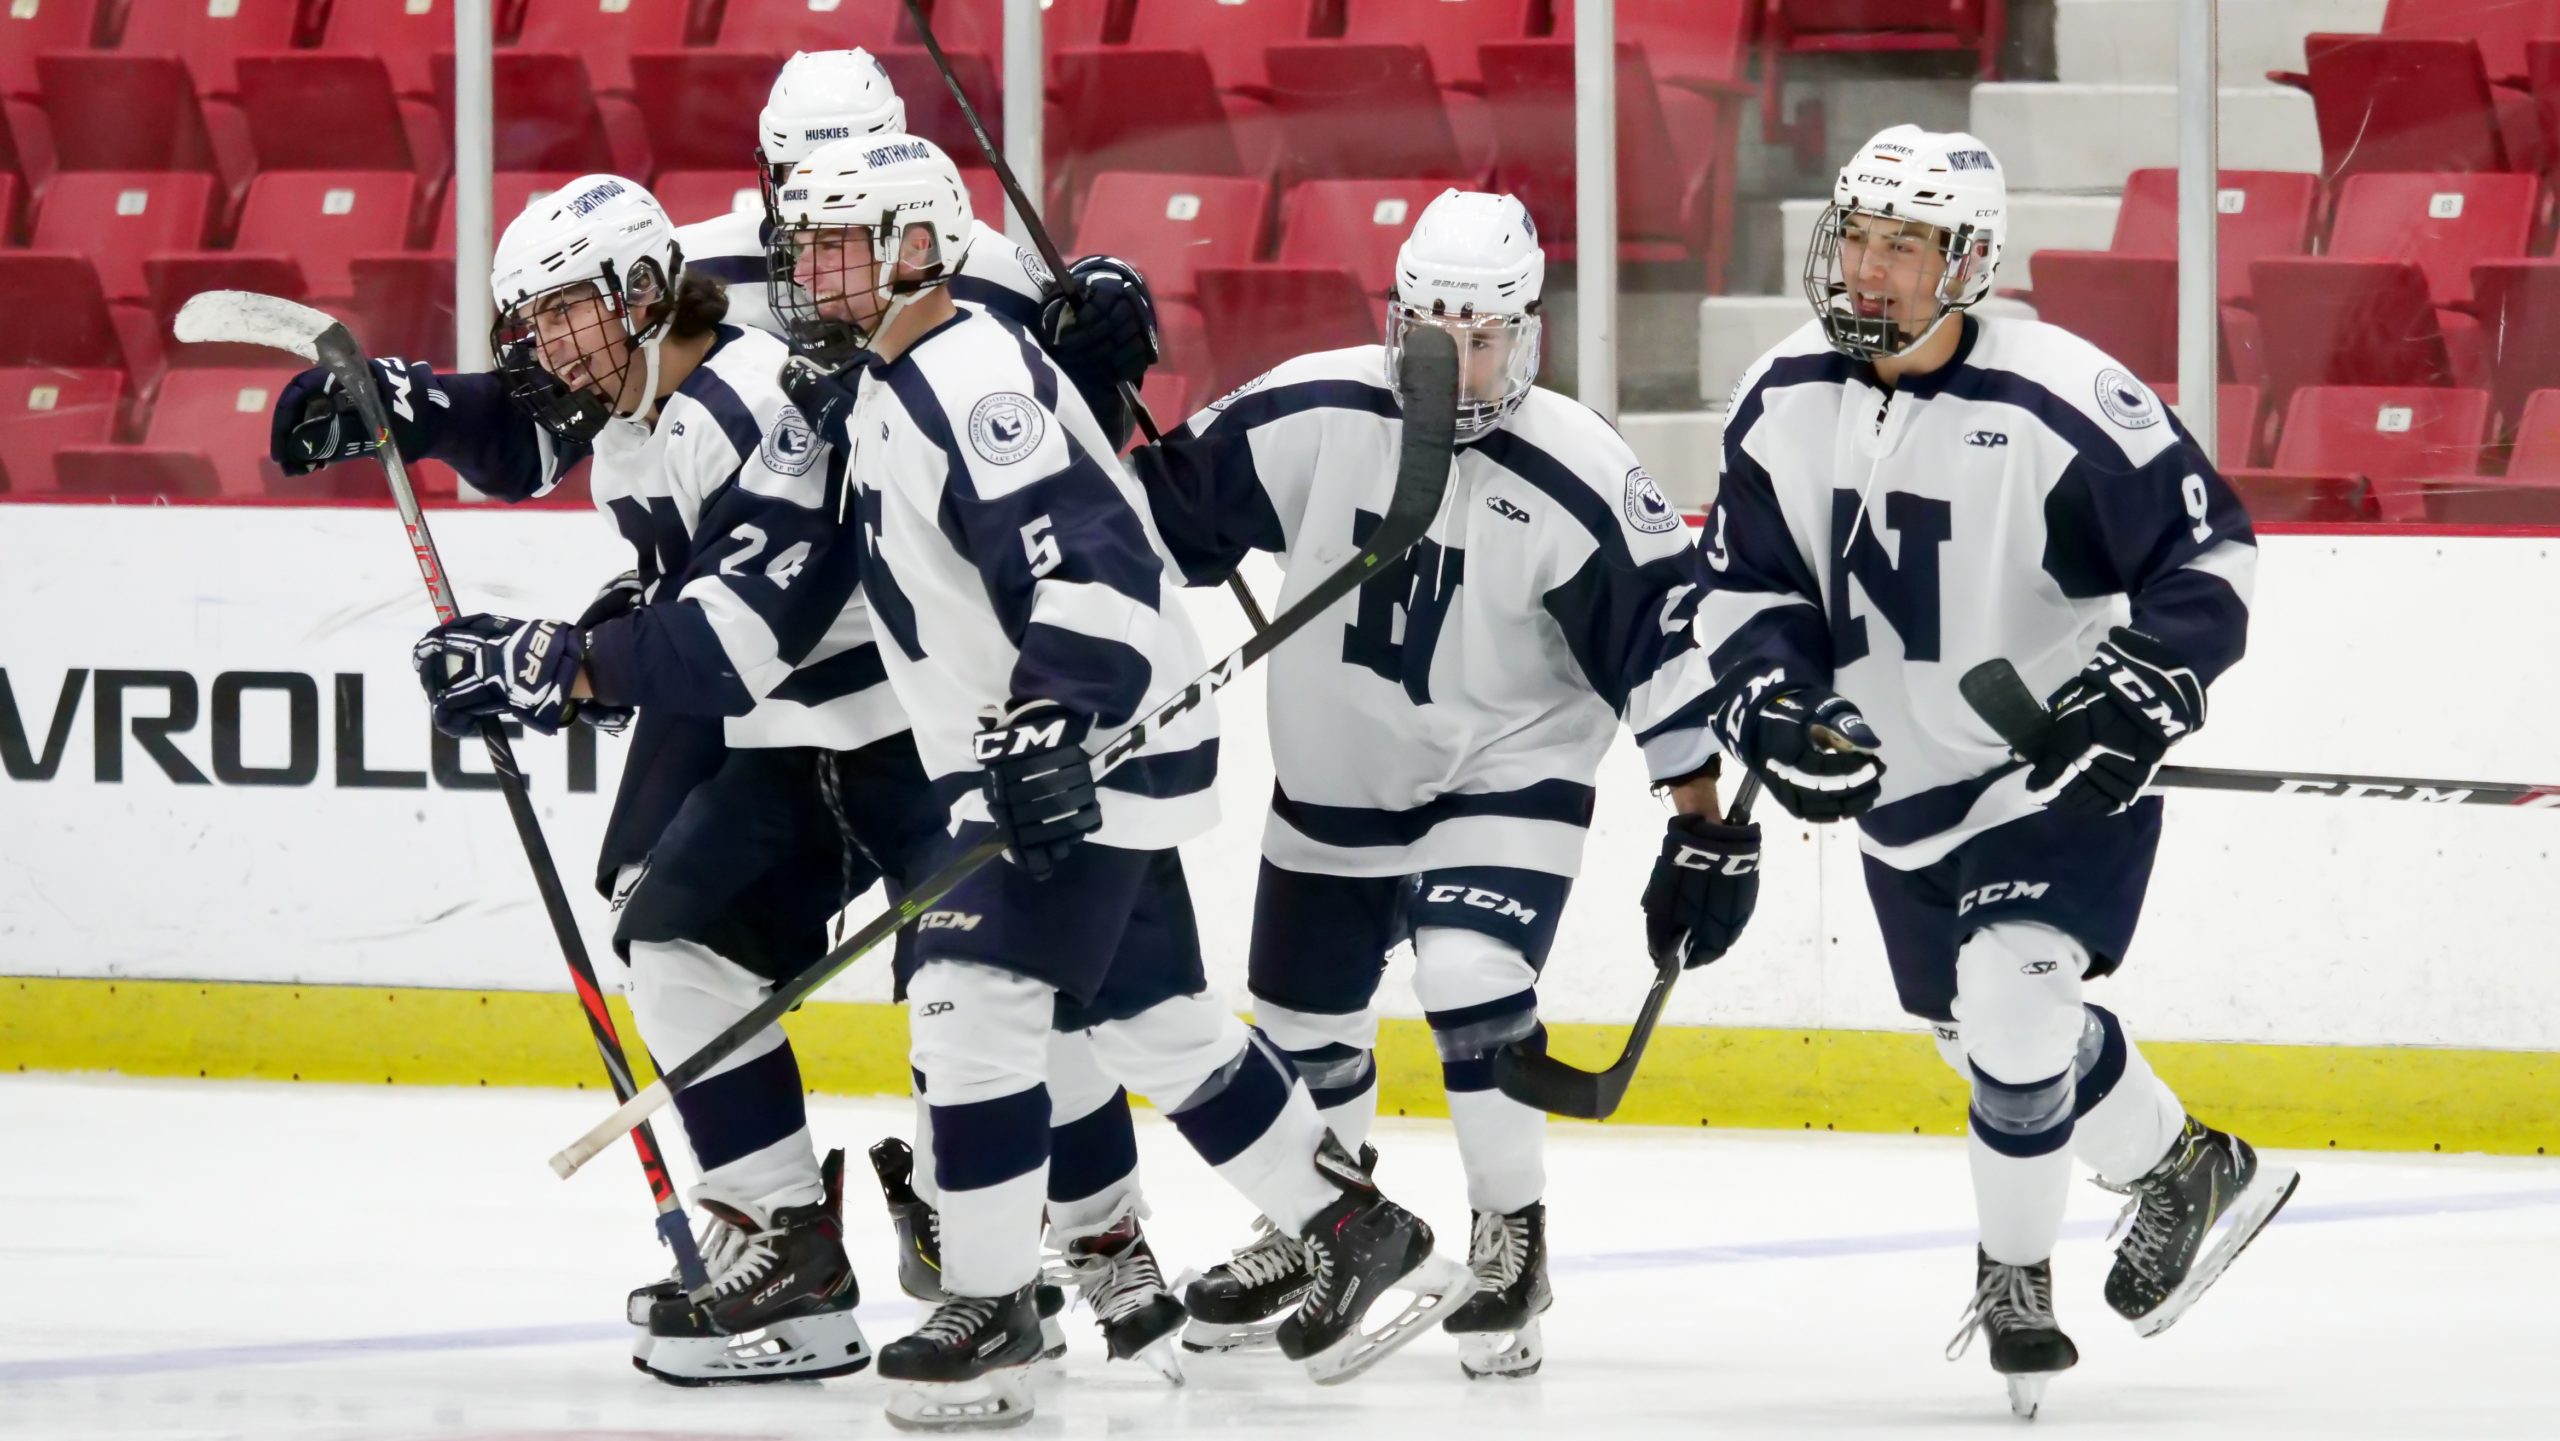 Five hockey players from Nichols School celebrate after scoring a goal.